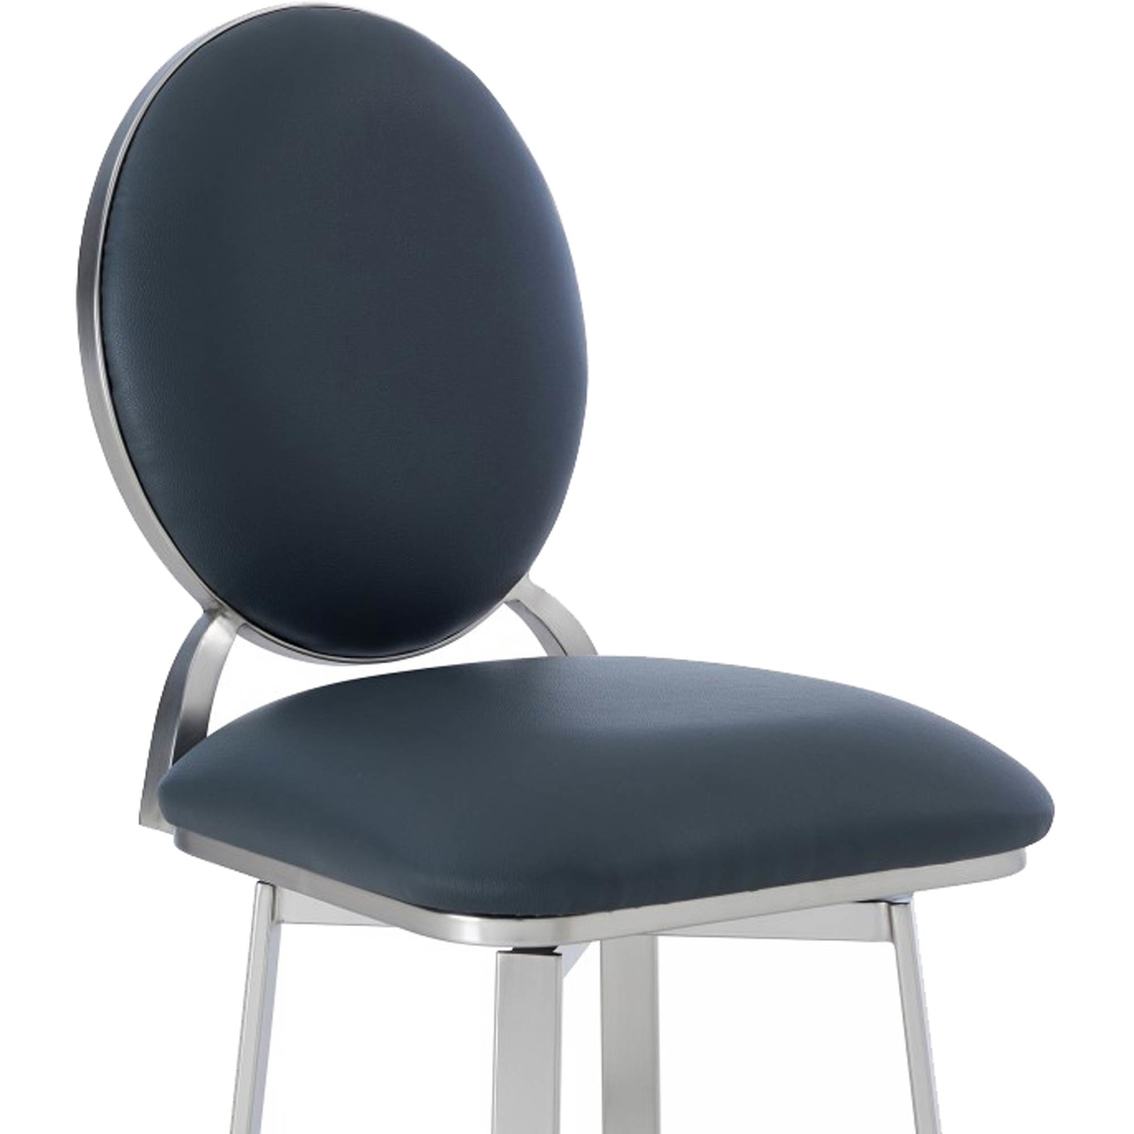 Armen Living Pia Barstool in Brushed Stainless Steel Finish and Black Faux Leather - Image 4 of 7